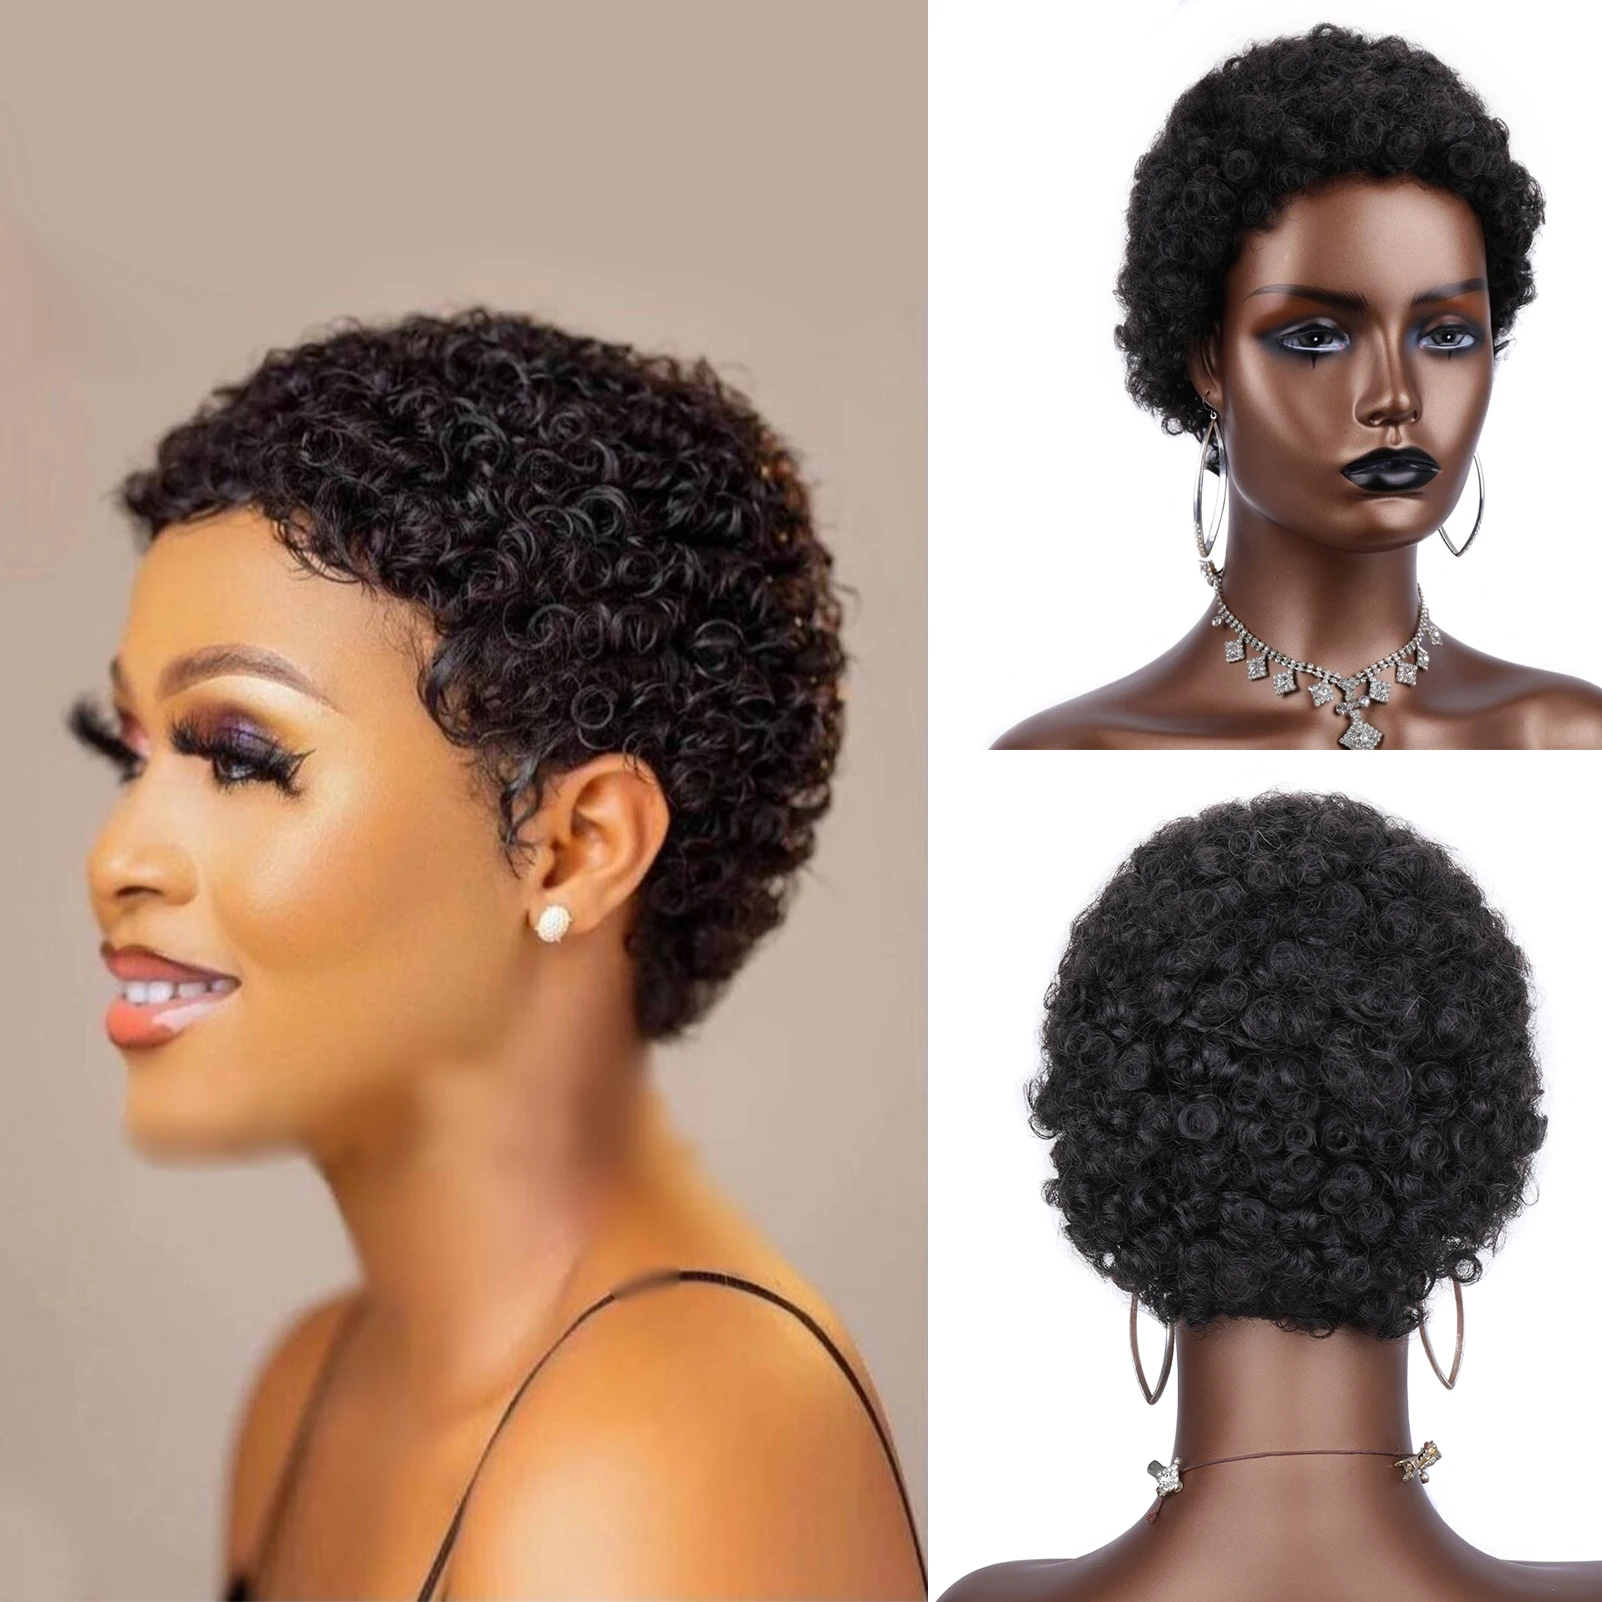 Super short afro curl pixie wig 100% human hair Brazil remy no lace wig boy - $35.10